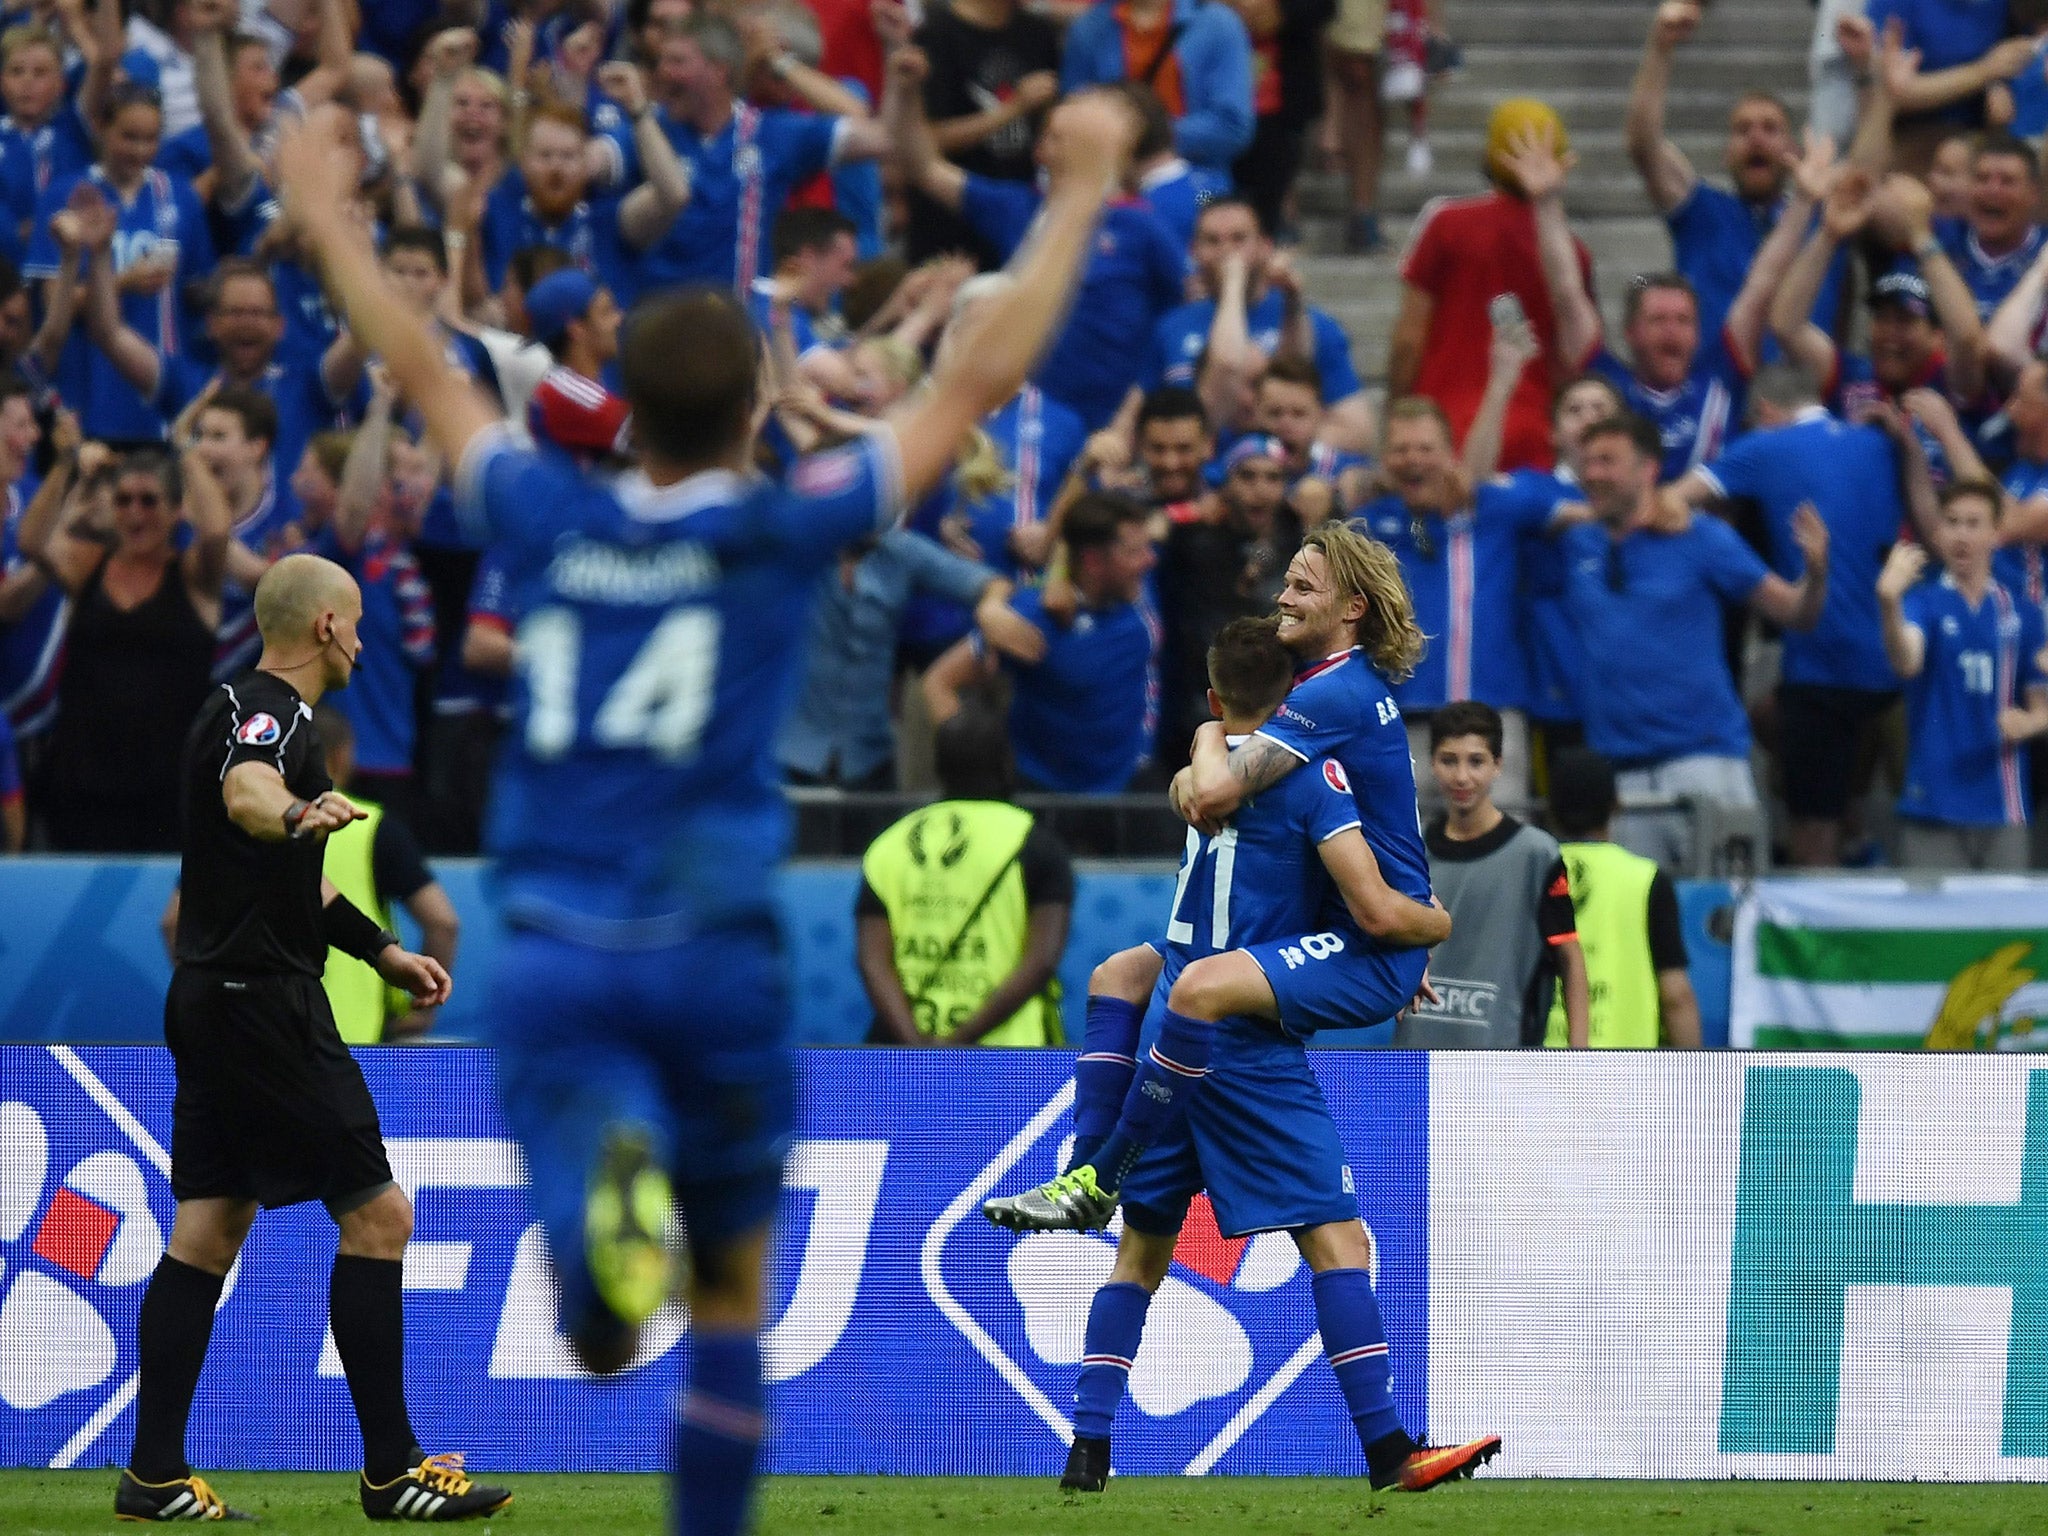 Iceland players and fans celebrate Traustason's goal